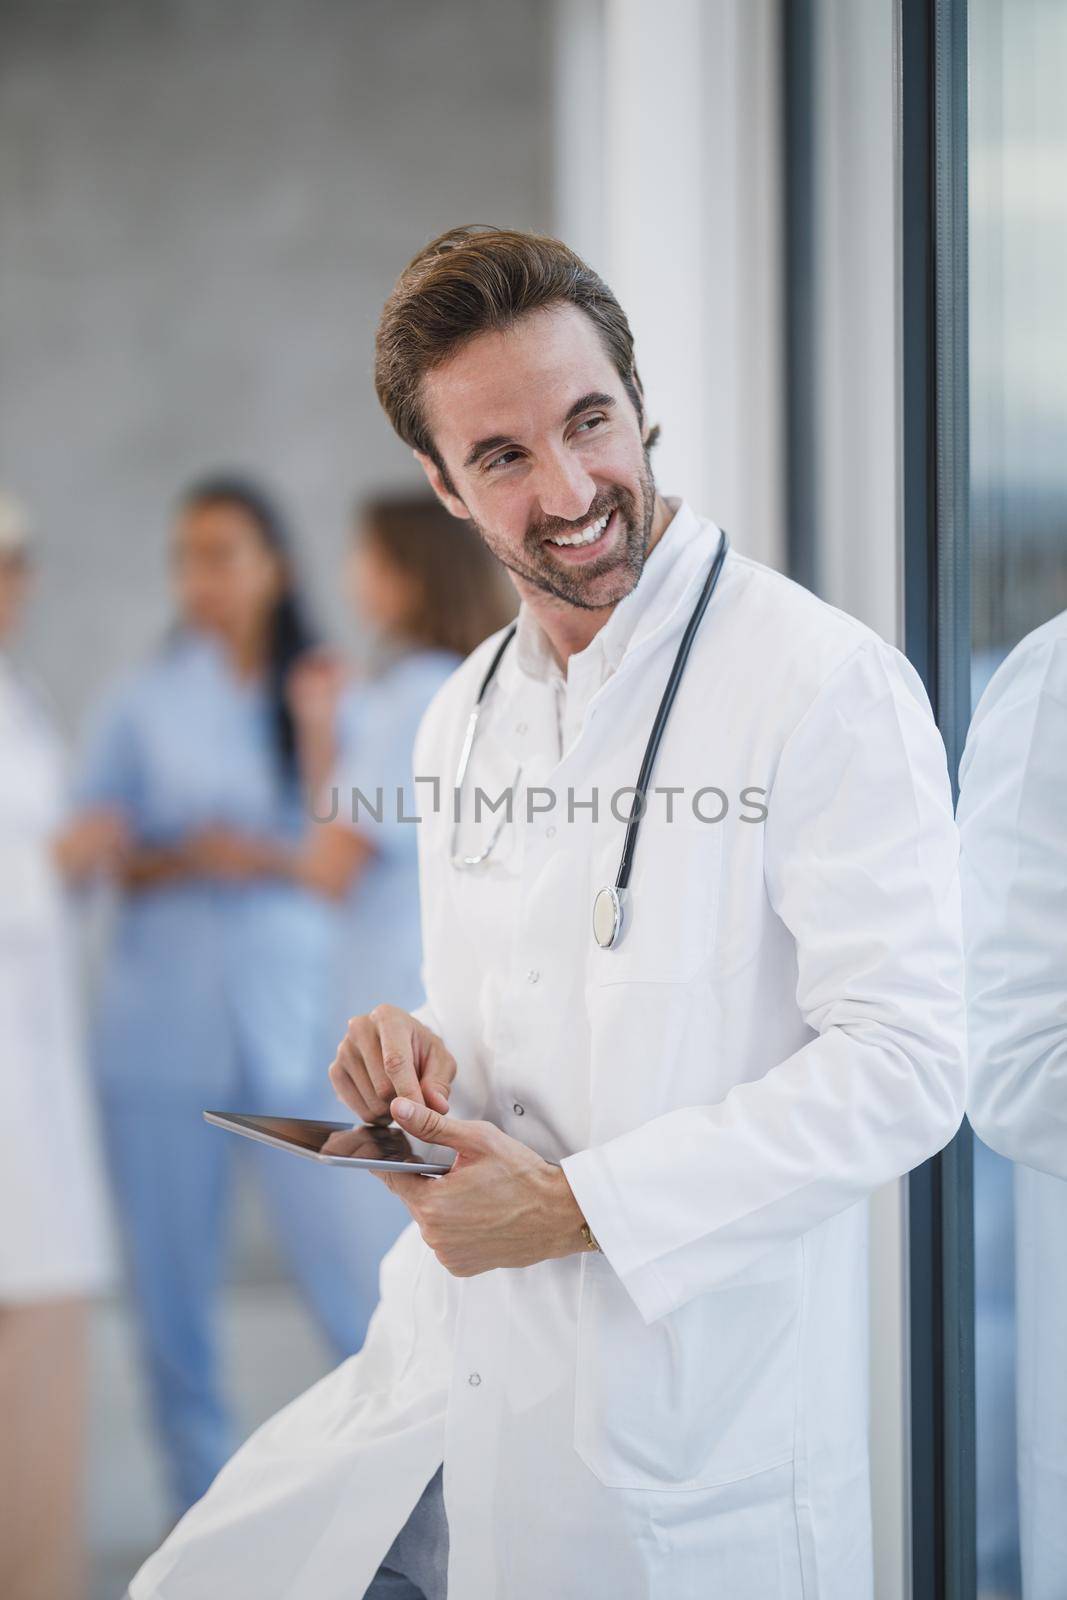 Shot of a smiling doctor using digital tablet and pensive looking out the window while having quick break in a hospital hallway.